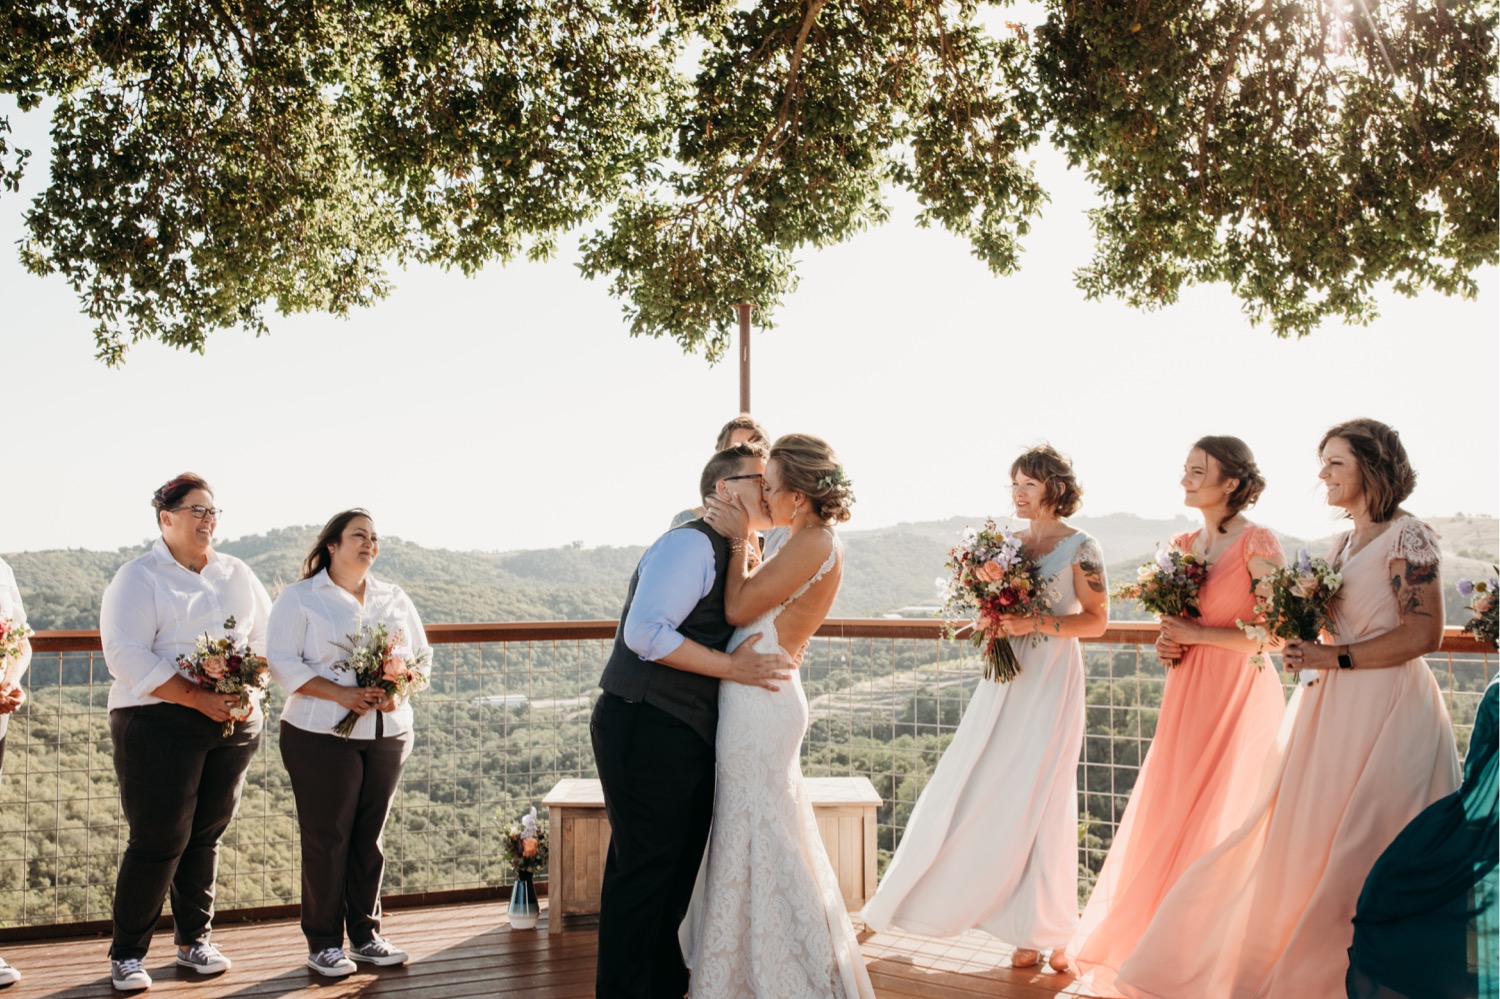 Brides kiss surrounded by friends overlooking the California vineyard. Liz Koston Photography.